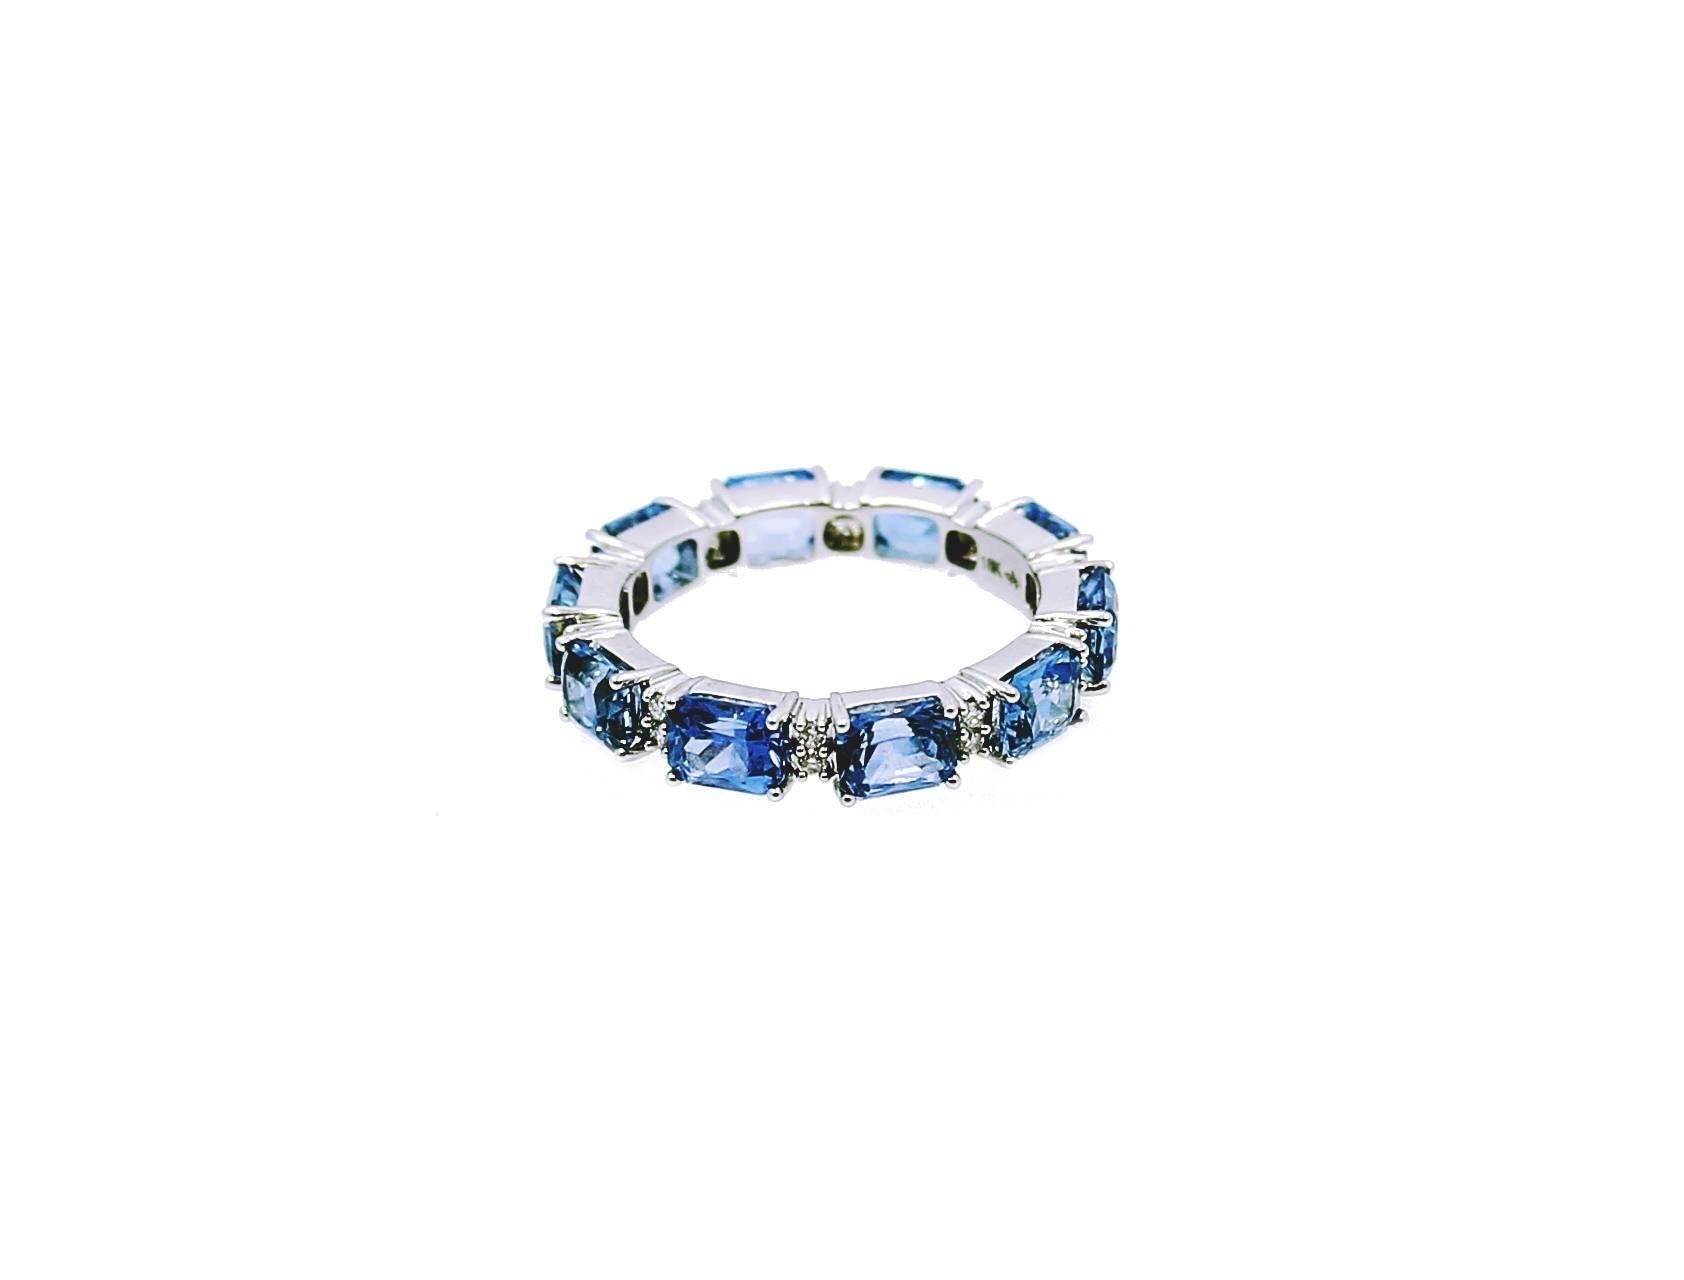 18K White Gold Eternity Band with Blue Emerald Cut Sapphires which equal 5.09 carats and Round Brilliant Diamonds which equal .16 carats. The ring is a size 7 and in excellent condition. 